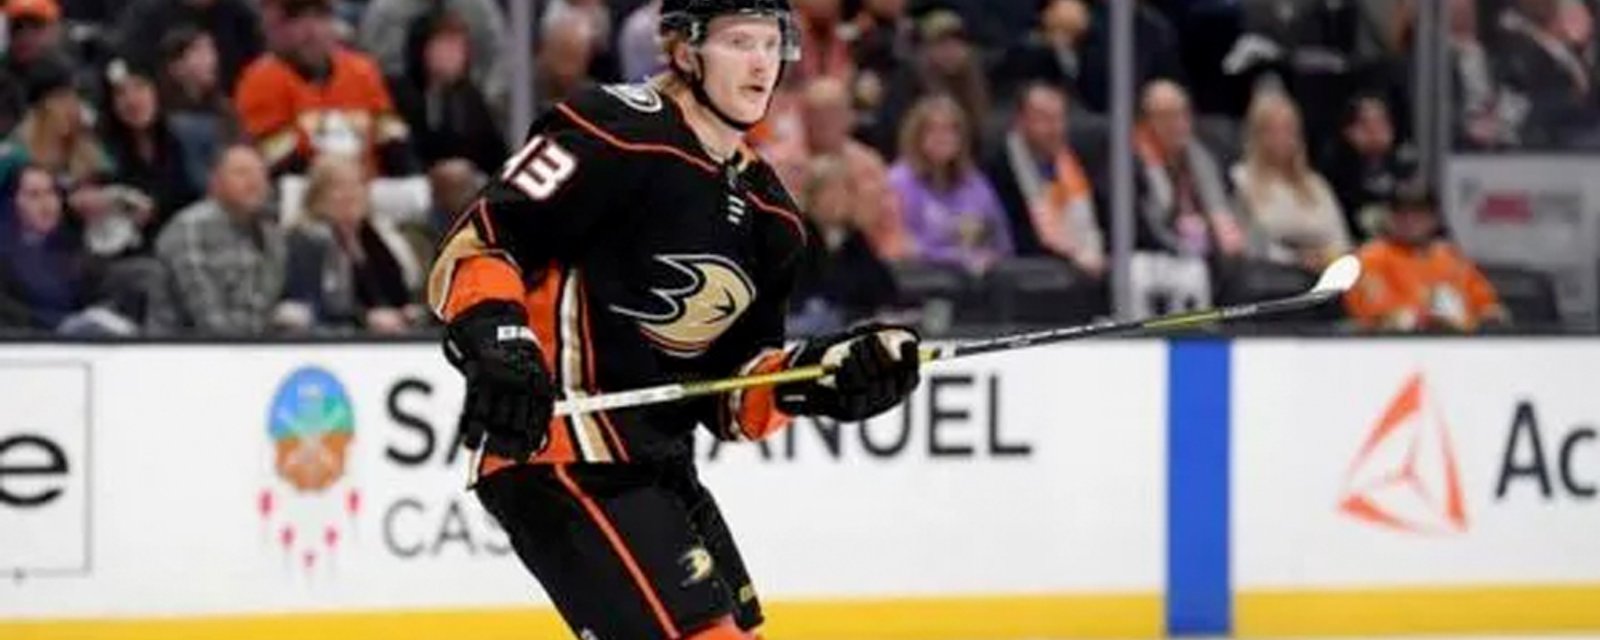 Danton Heinen, one of the few 40+ point players left in free agency, signs a one year deal